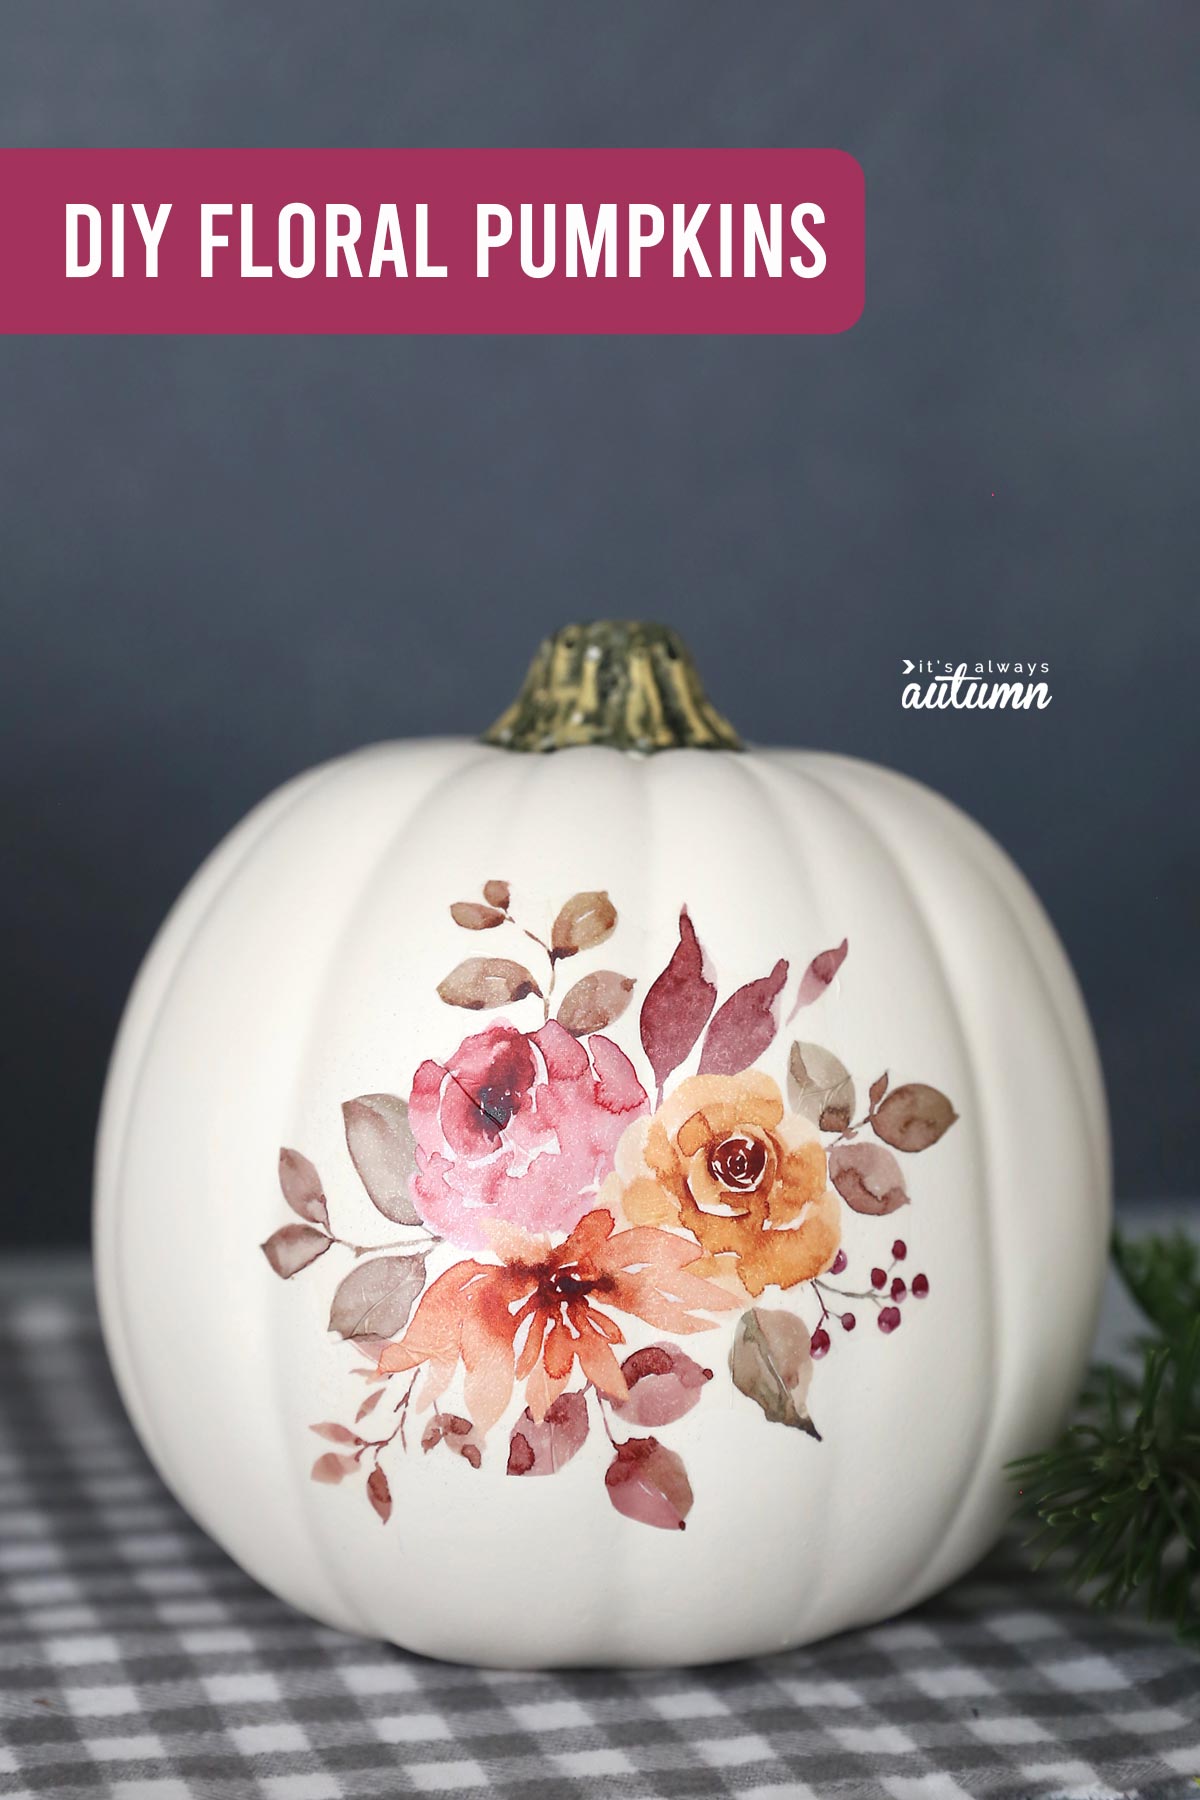 This pretty floral pumpkin is easy to make in 15 minutes using temporary tattoo paper!